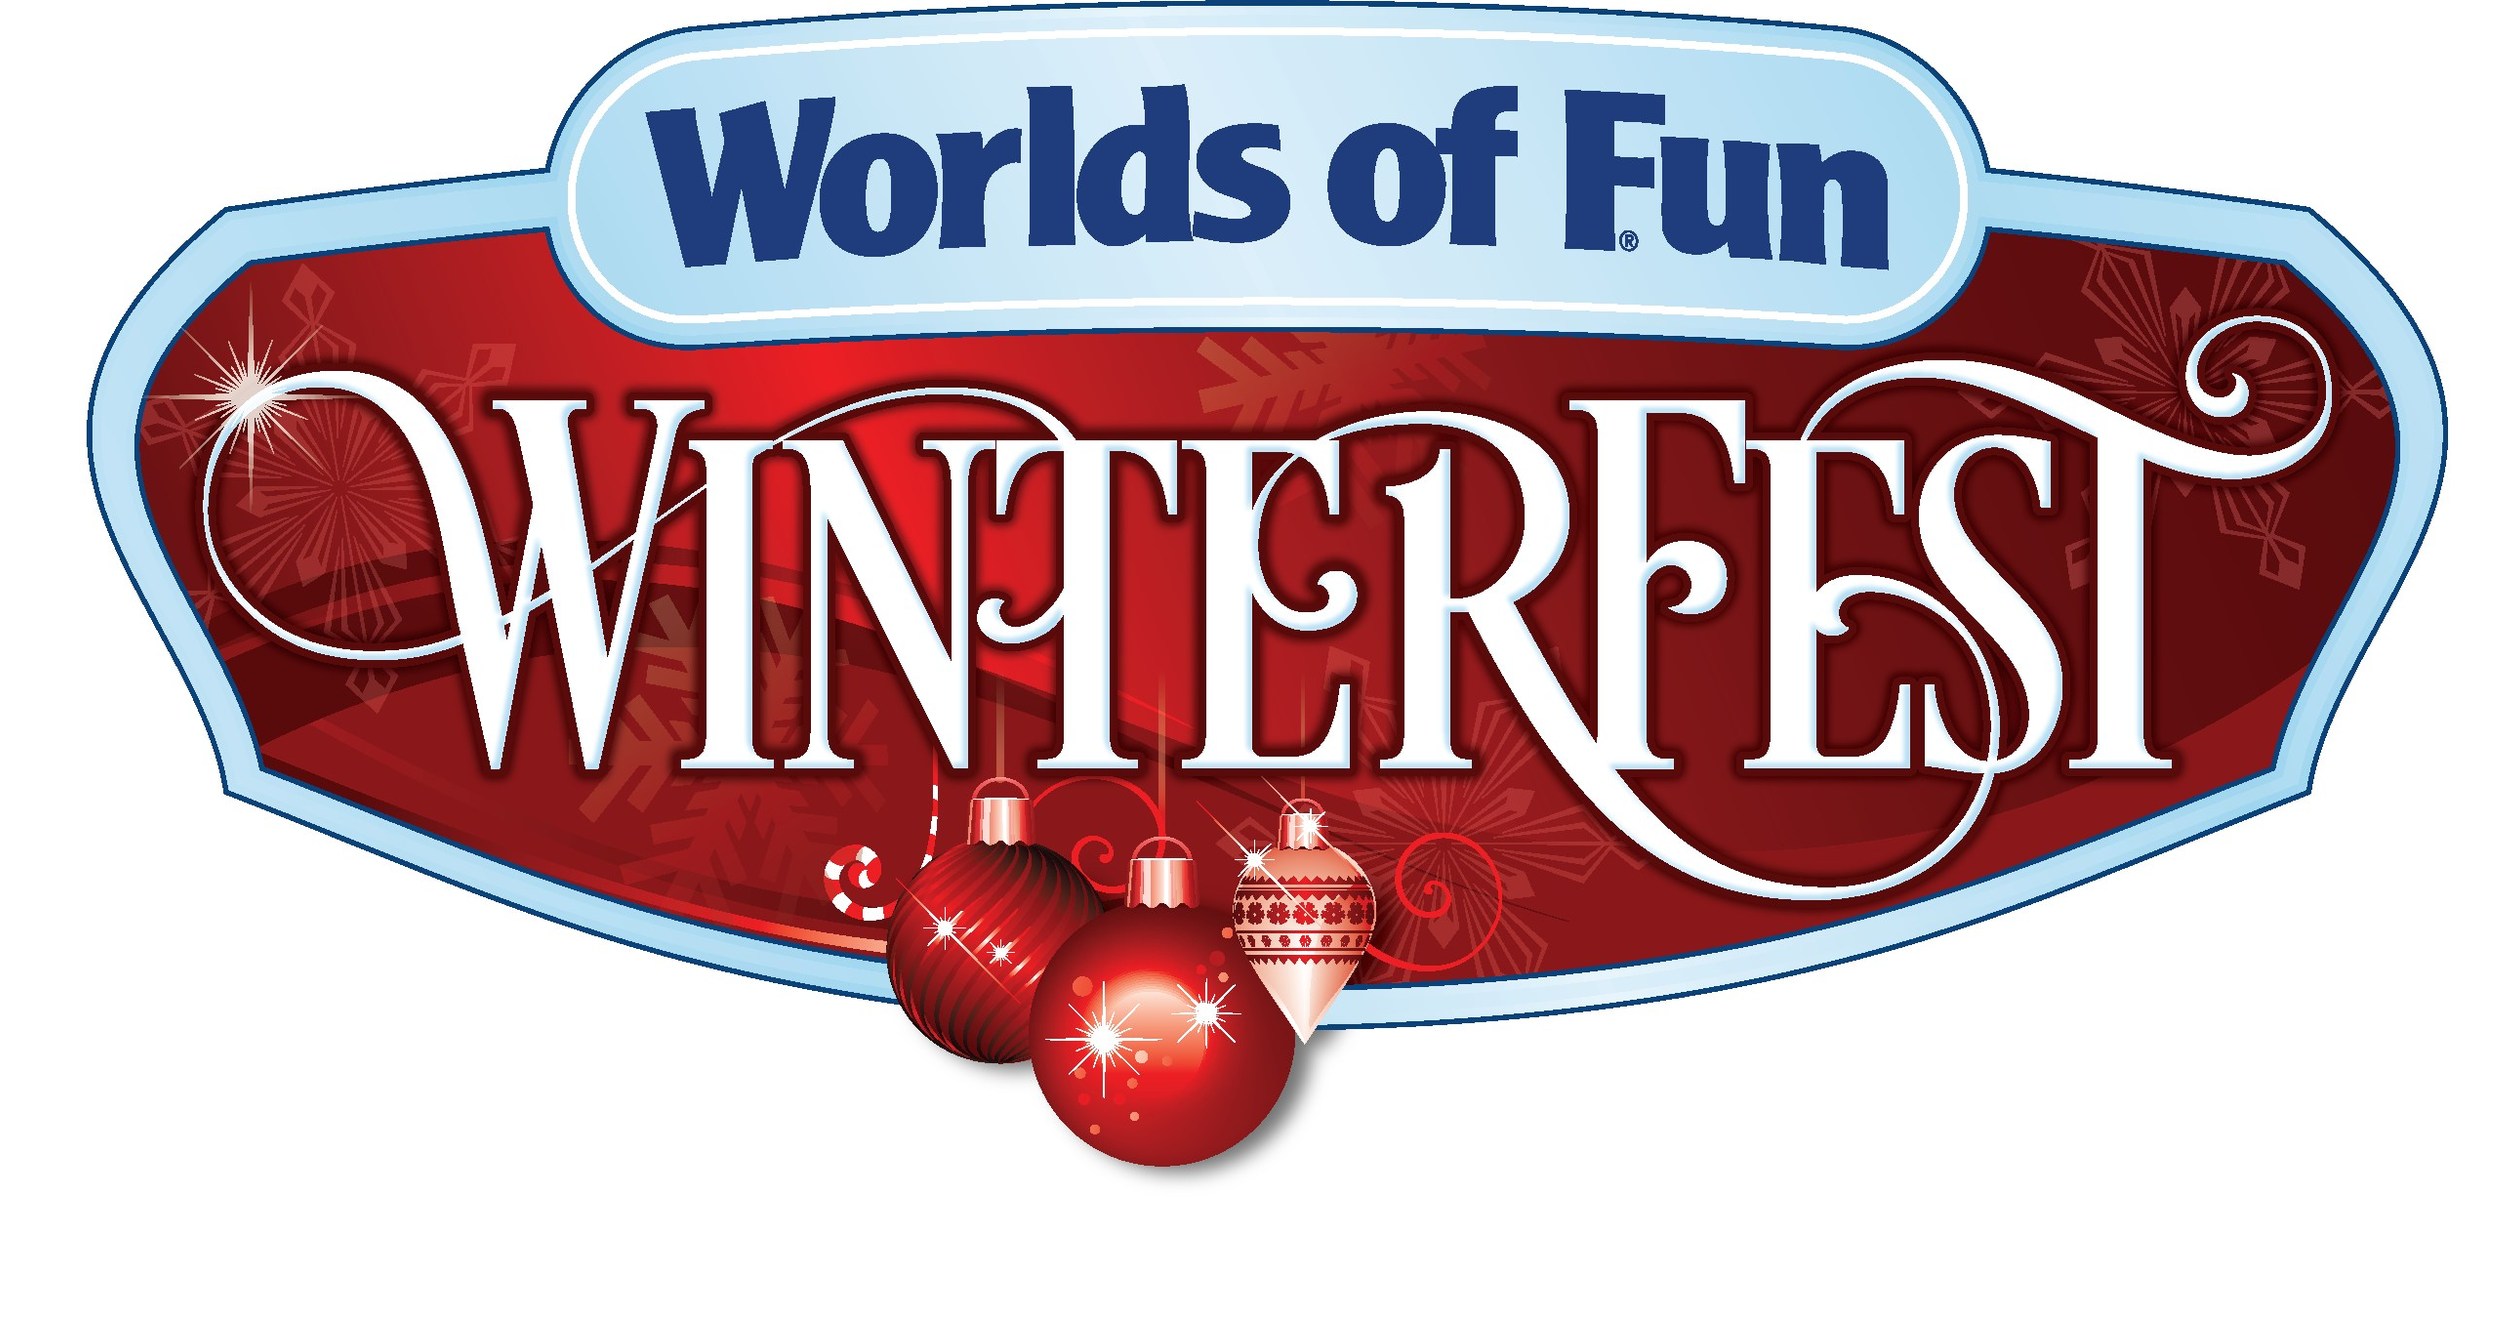 WinterFest at Worlds of Fun Opens November 24